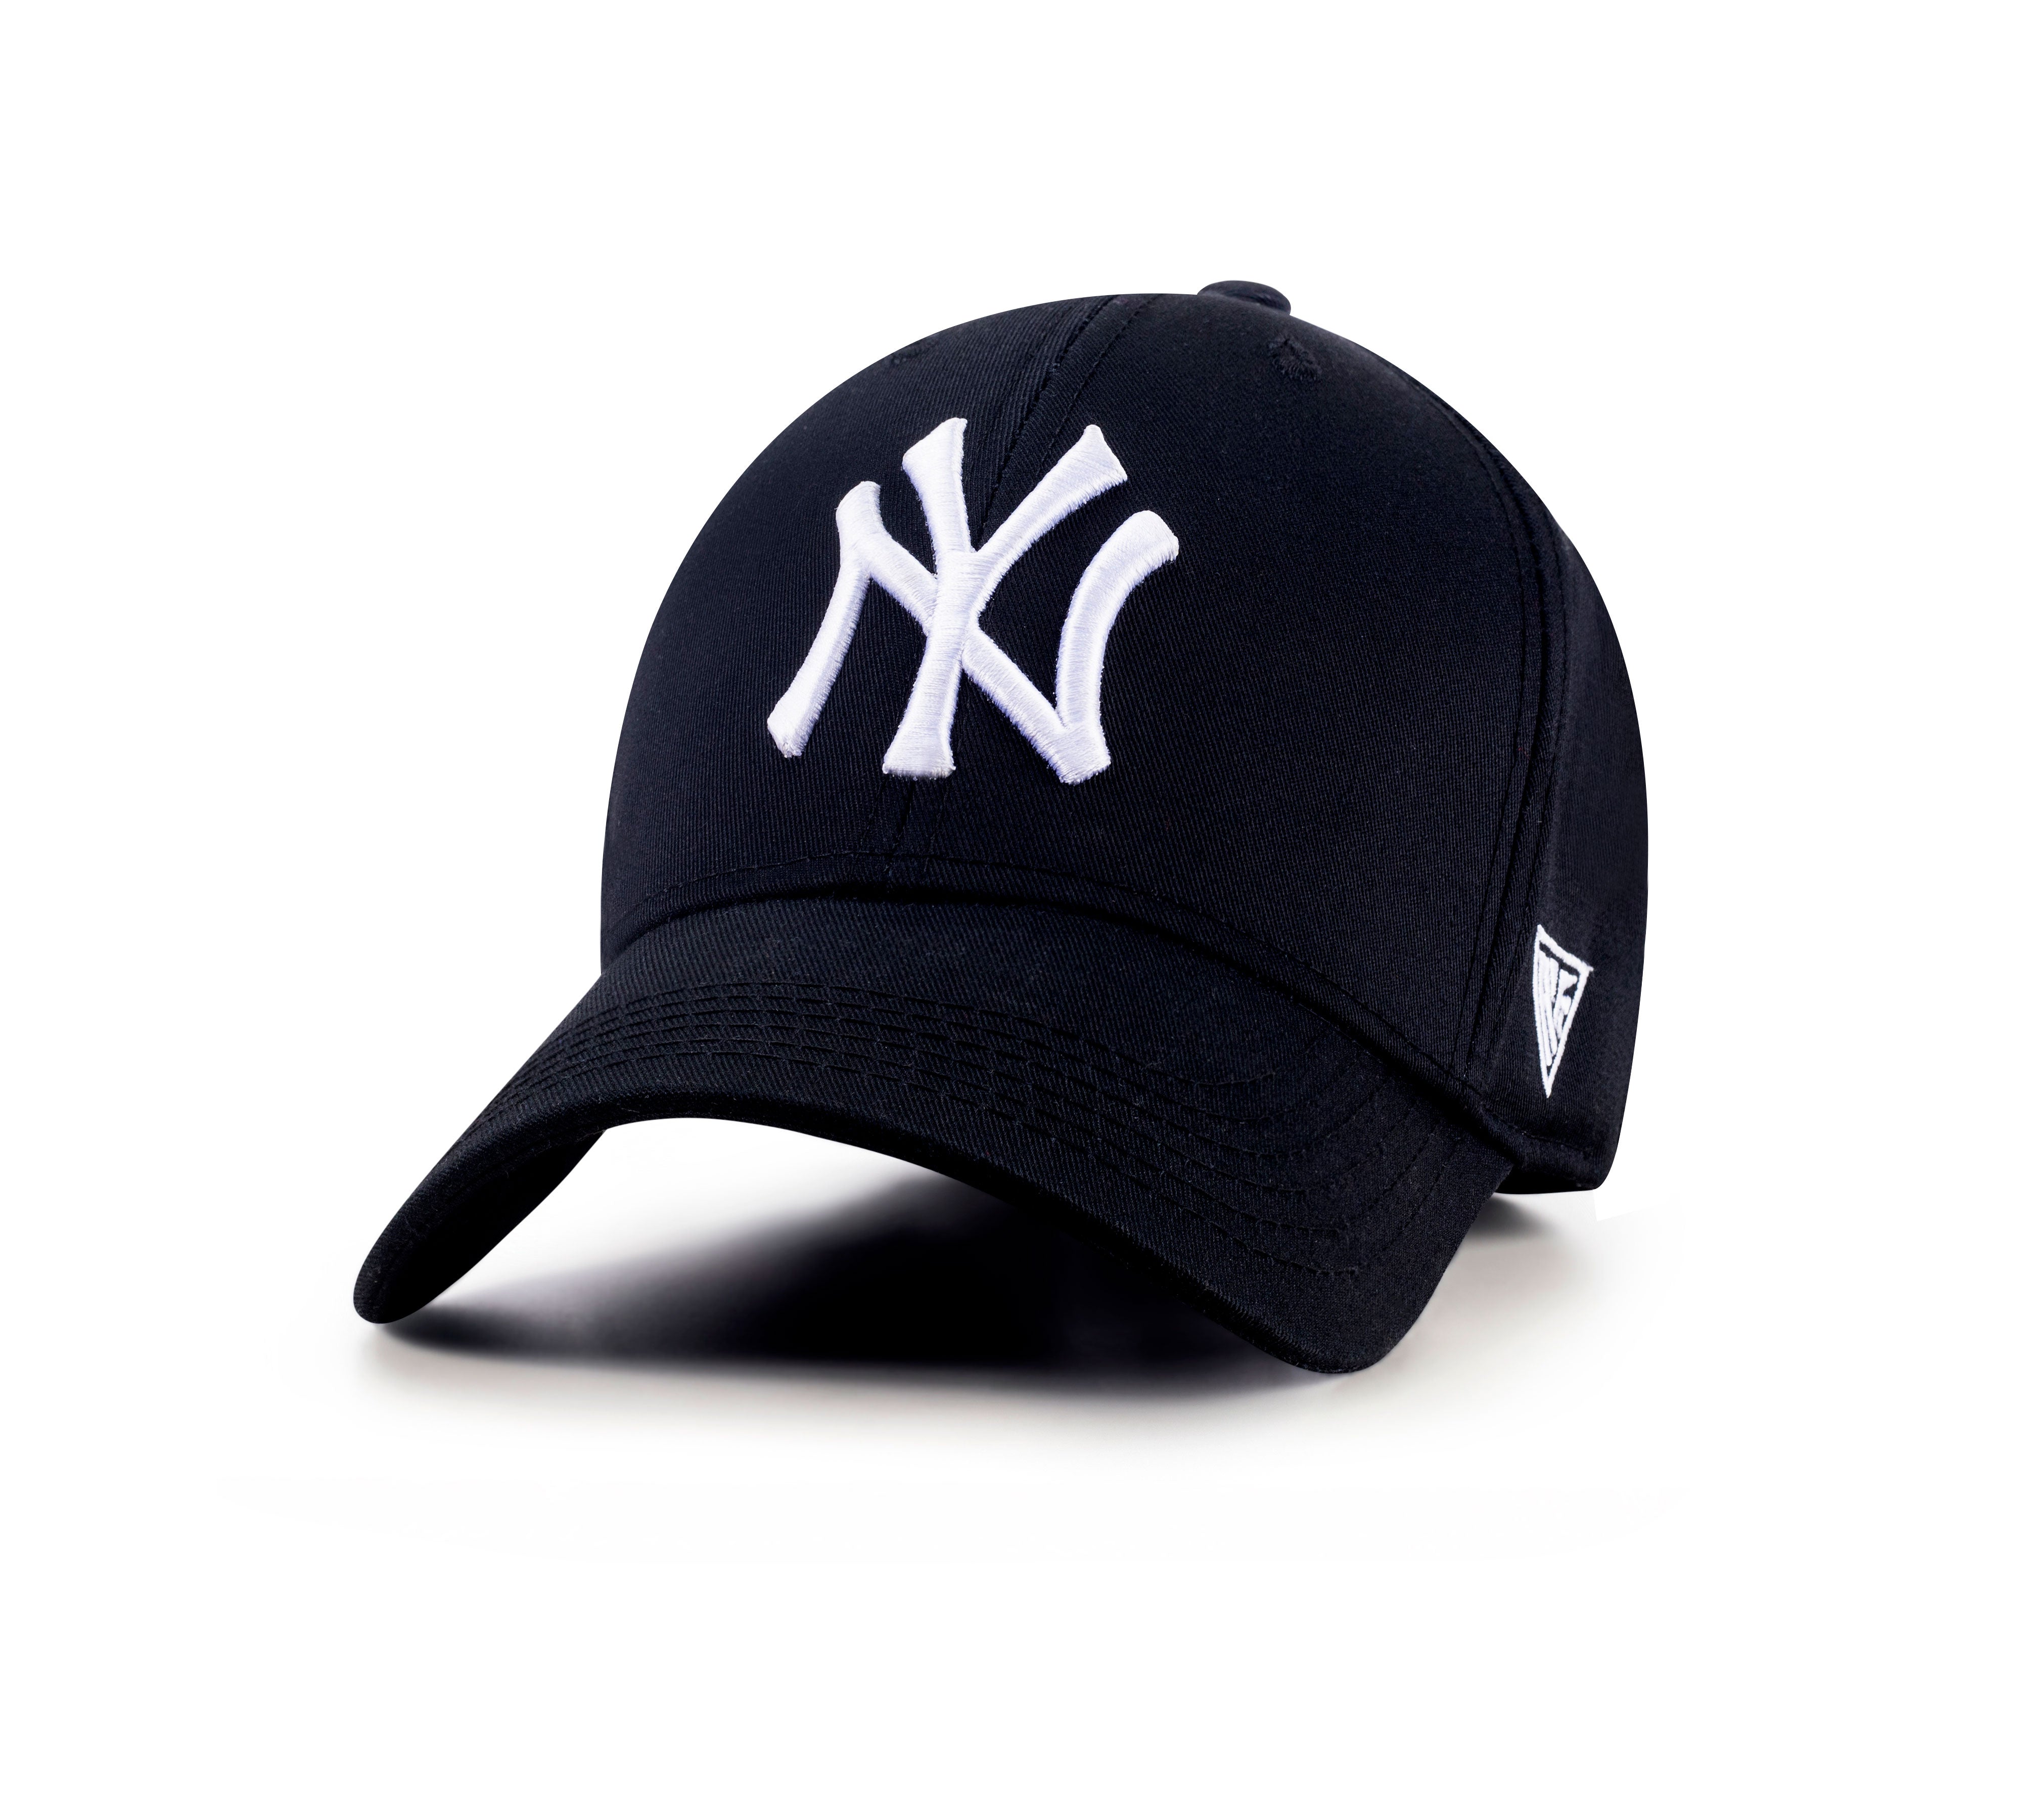 New York Cap for Men and Women | NY Hat Crafted from Pure Cotton Twill Material with Exquisite Embroidery I Adjustable NY Hat with Exceptional Comfort Durability & Versatility | Black